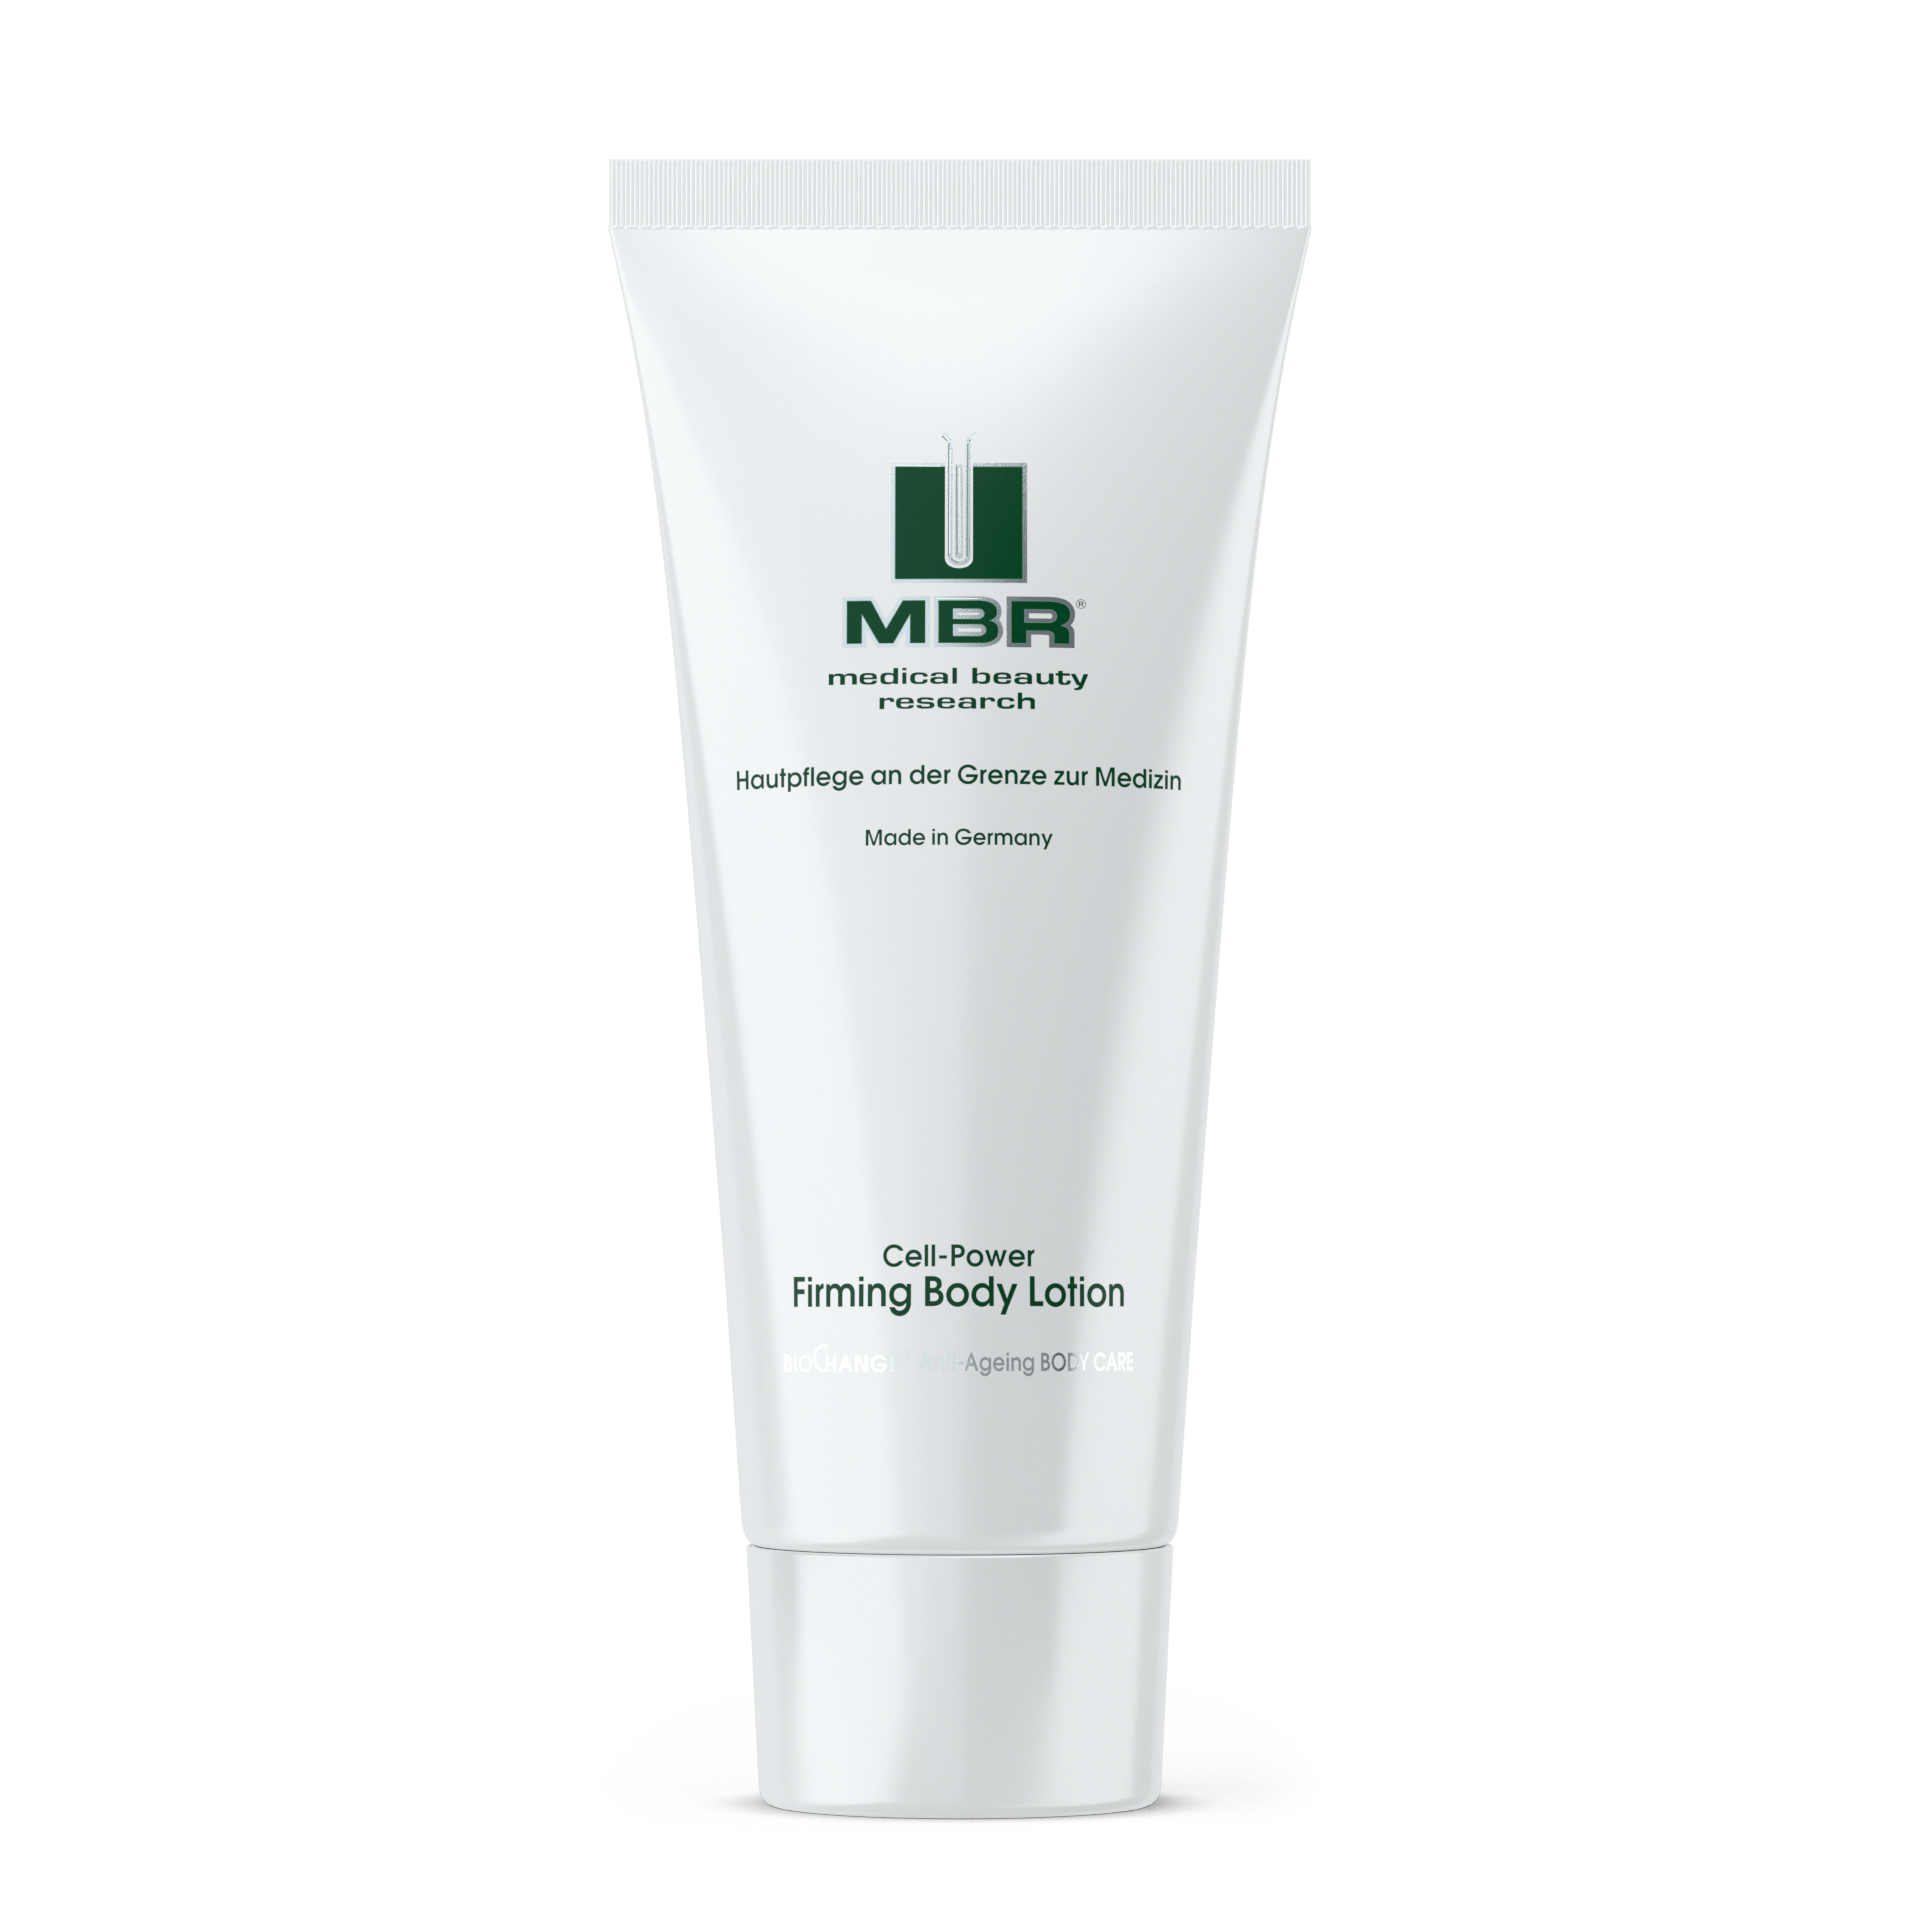 MBR FIRMING BODY LOTION